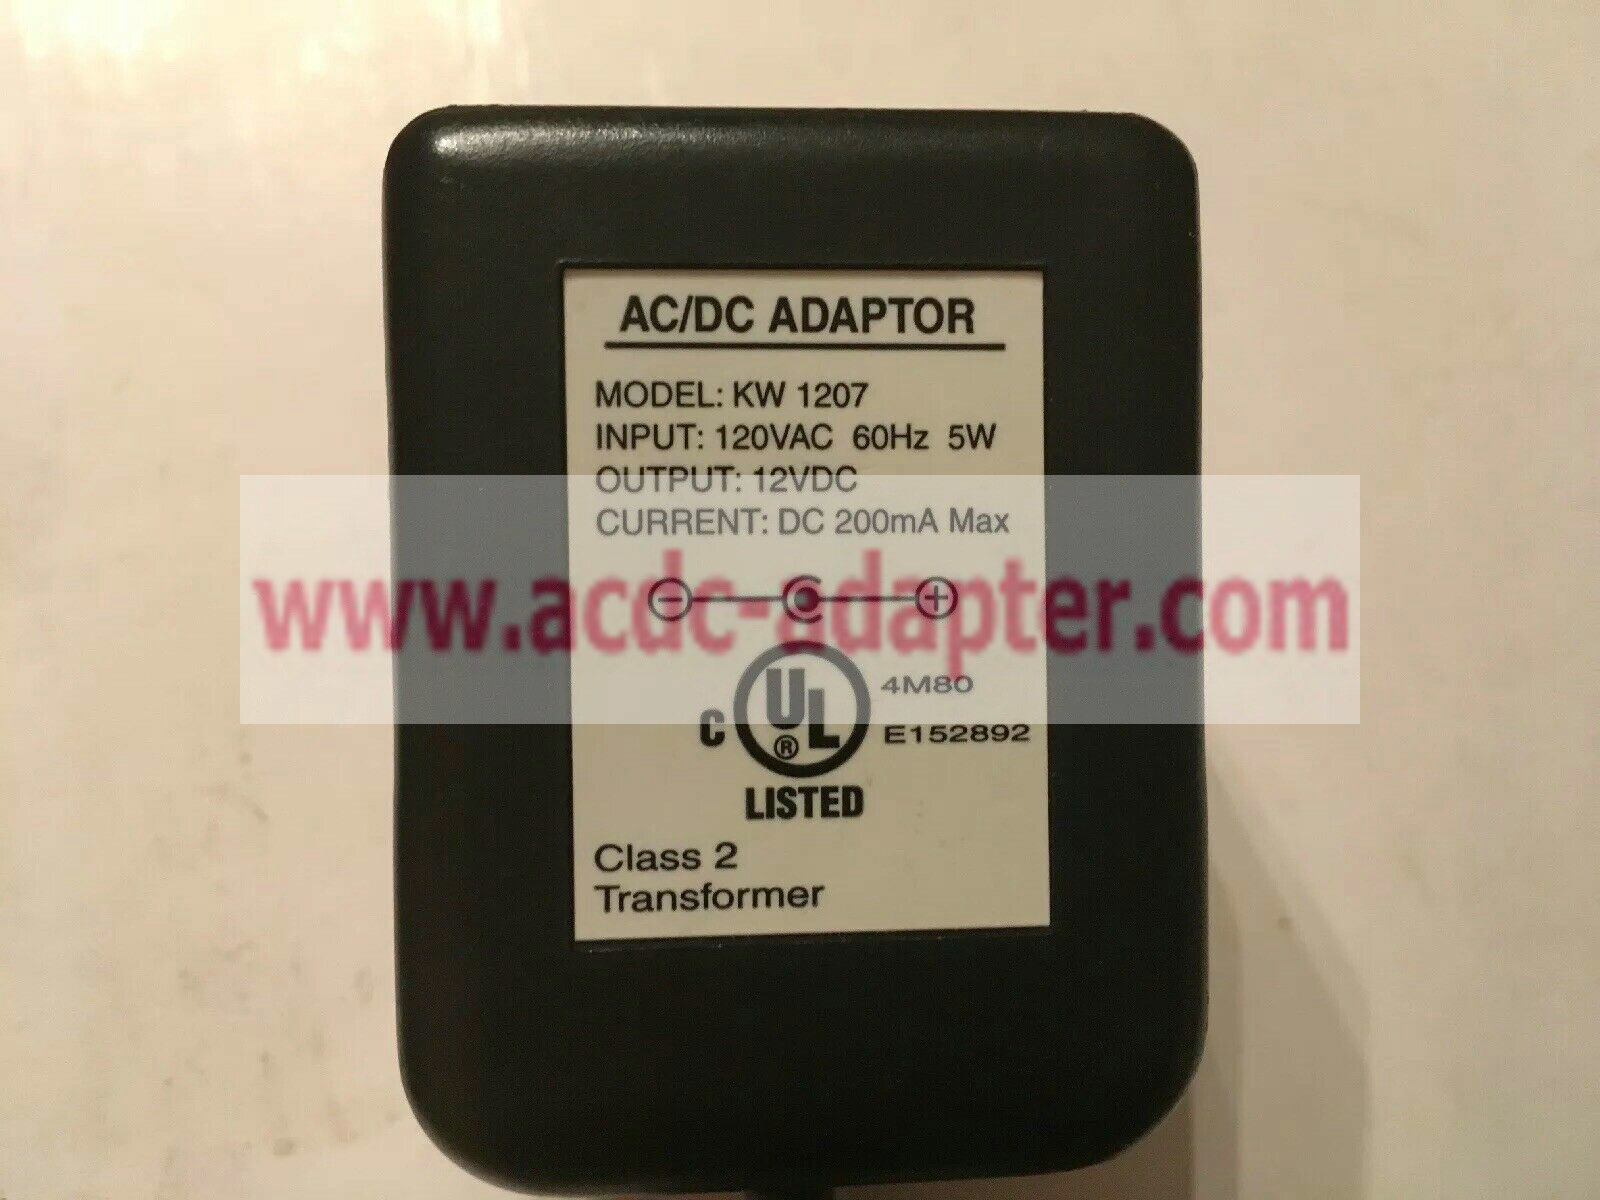 NEW KW 1207 12VDC DC200mA class 2 Transformer AC/DC ADAPTER POWER SUPPLY